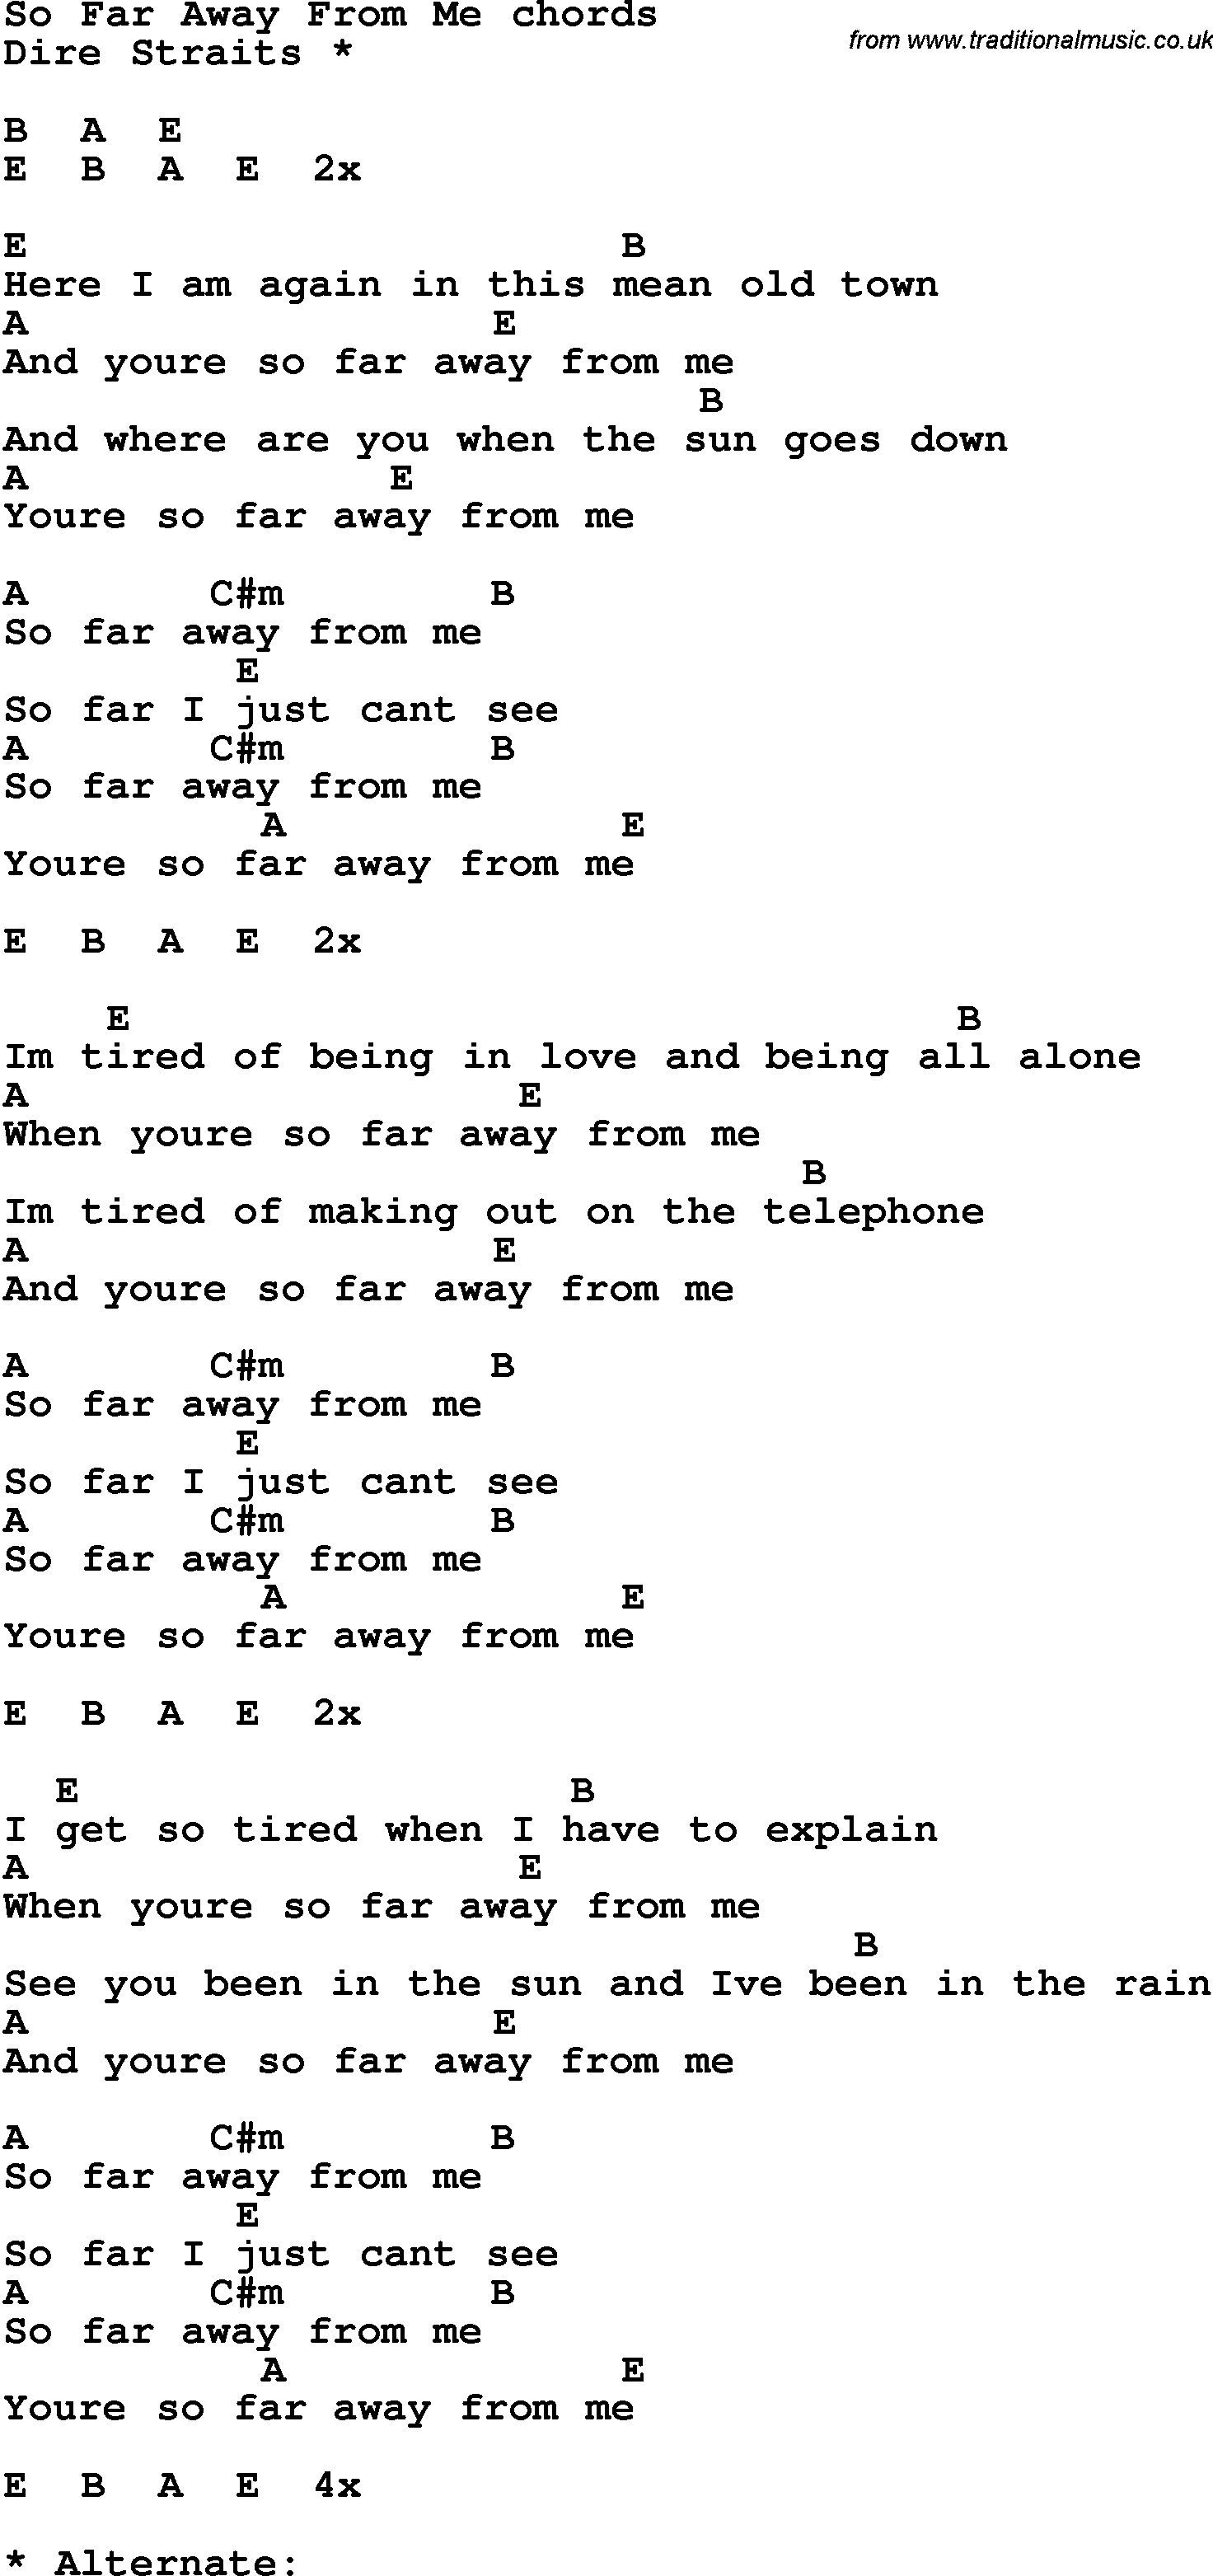 Song Lyrics with guitar chords for So Far Away From Me